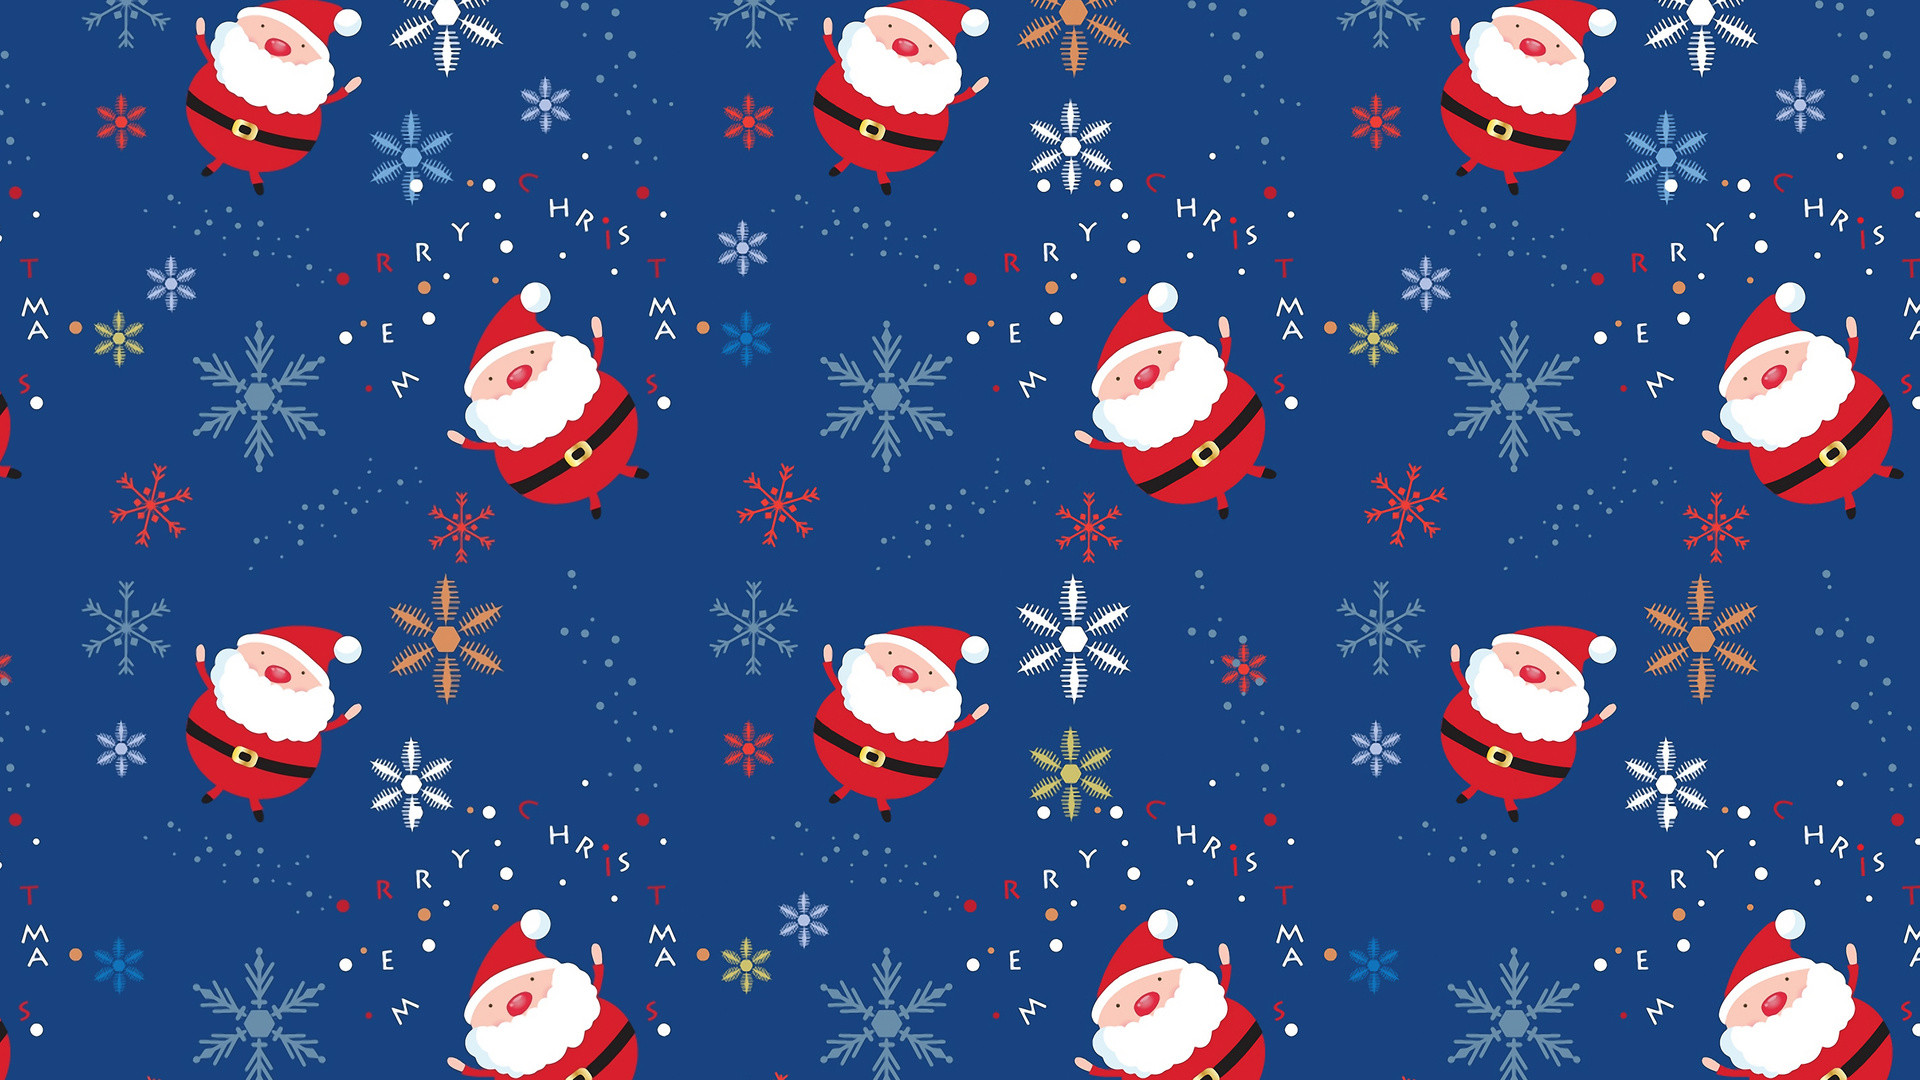 100+] Cute Christmas Iphone Wallpapers | Wallpapers.com